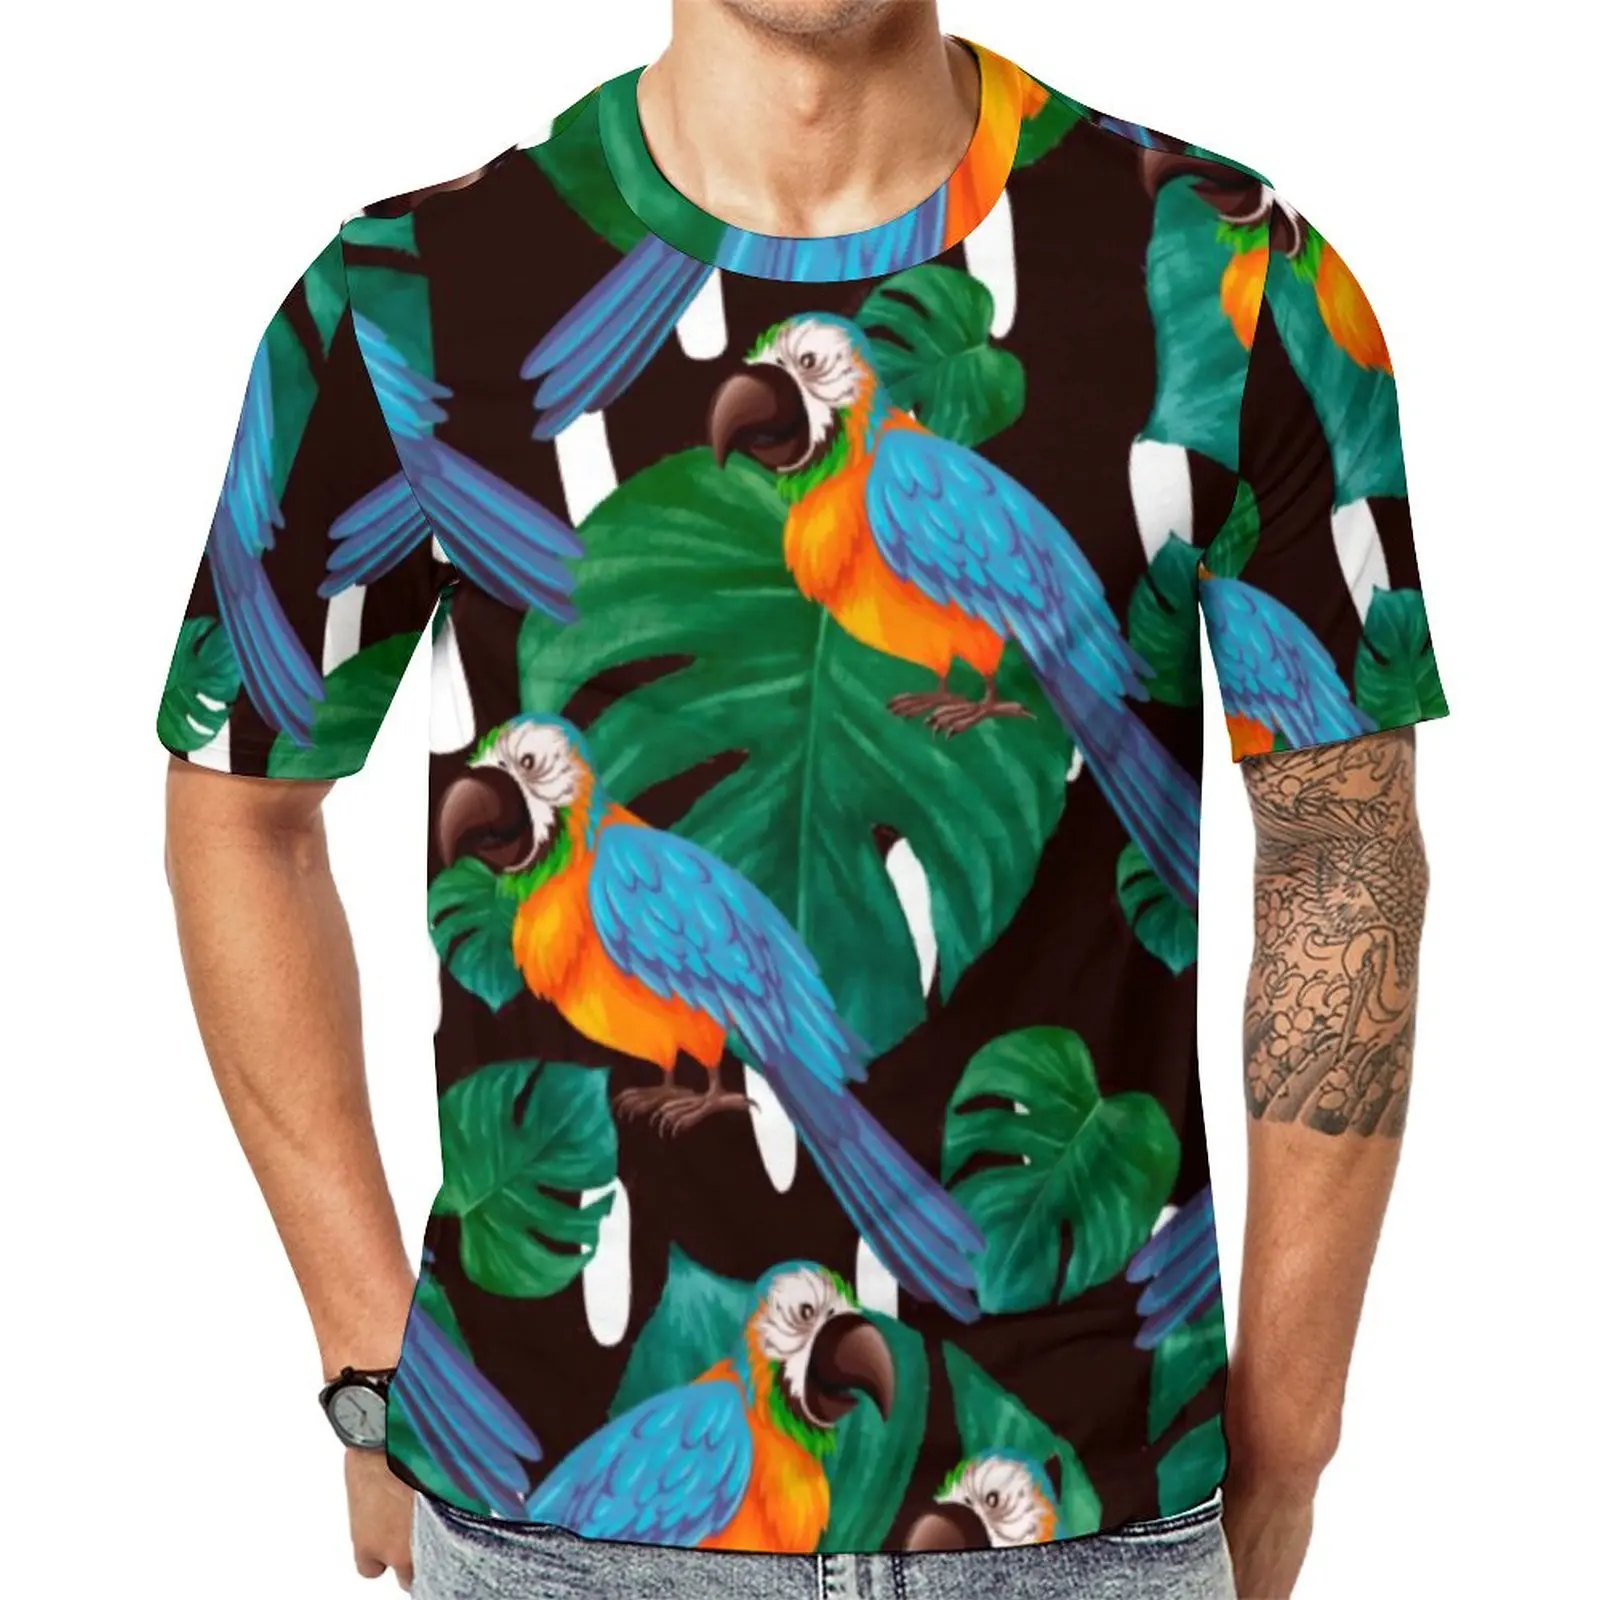 

Tropical Birds T-Shirt Palm Leaves Print Funny T-Shirts O Neck Novelty Tee Shirt Summer Male Graphic Tees Plus Size 5XL 6XL